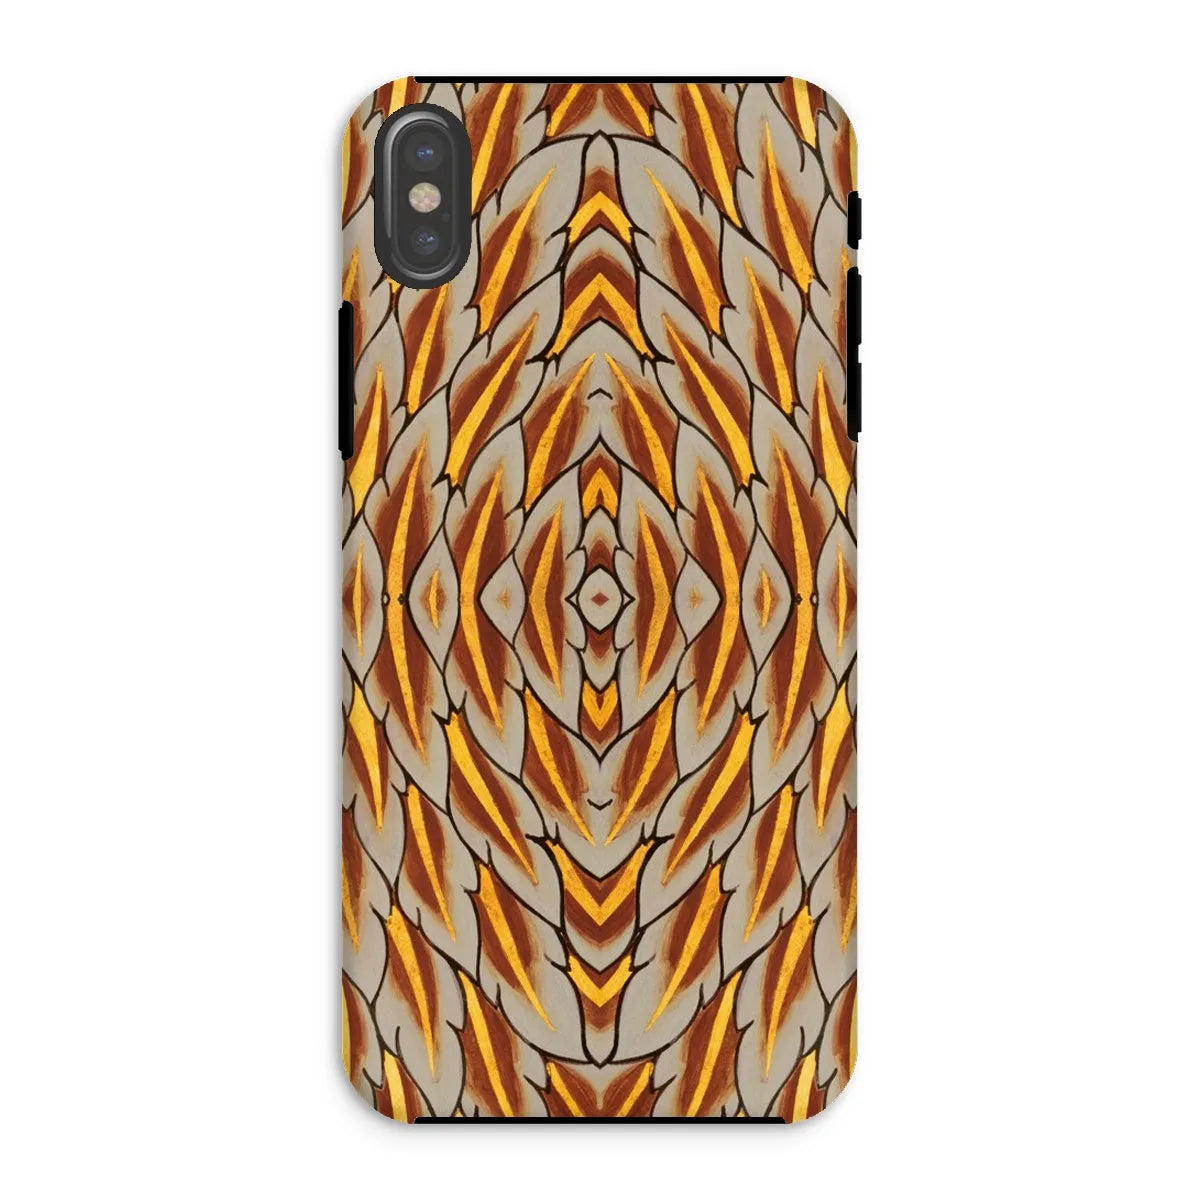 Featherweight Champion Thai Aesthetic Art Phone Case - Iphone Xs / Matte - Mobile Phone Cases - Aesthetic Art